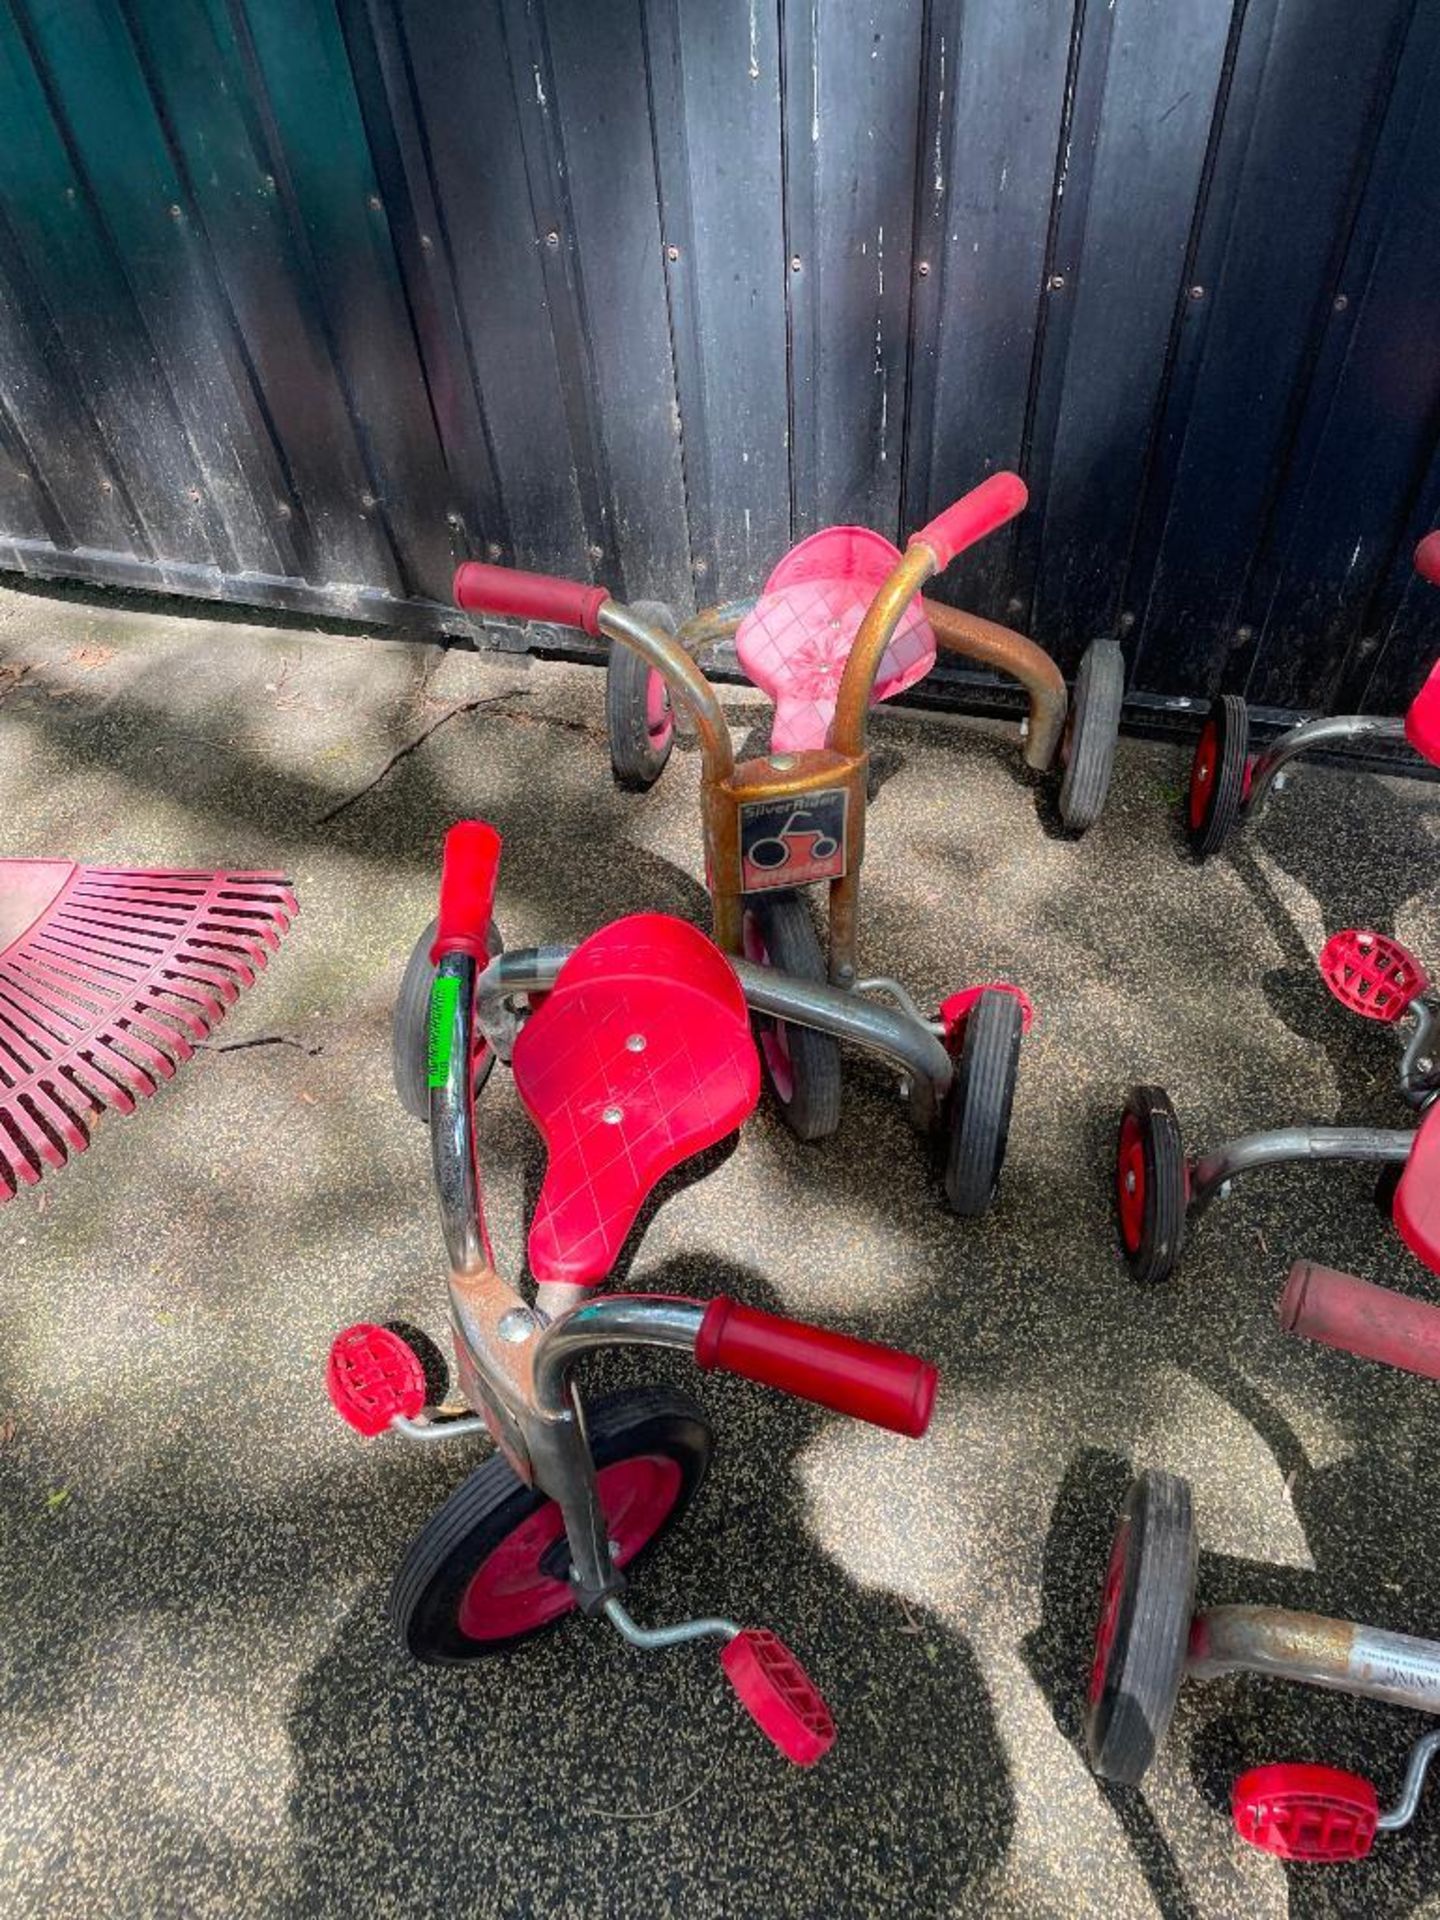 DESCRIPTION (2) ANGELES SILVER RIDER TRIKE BIKE BRAND/MODEL ANGELES LOCATION PLAYGROUND THIS LOT IS - Image 6 of 7